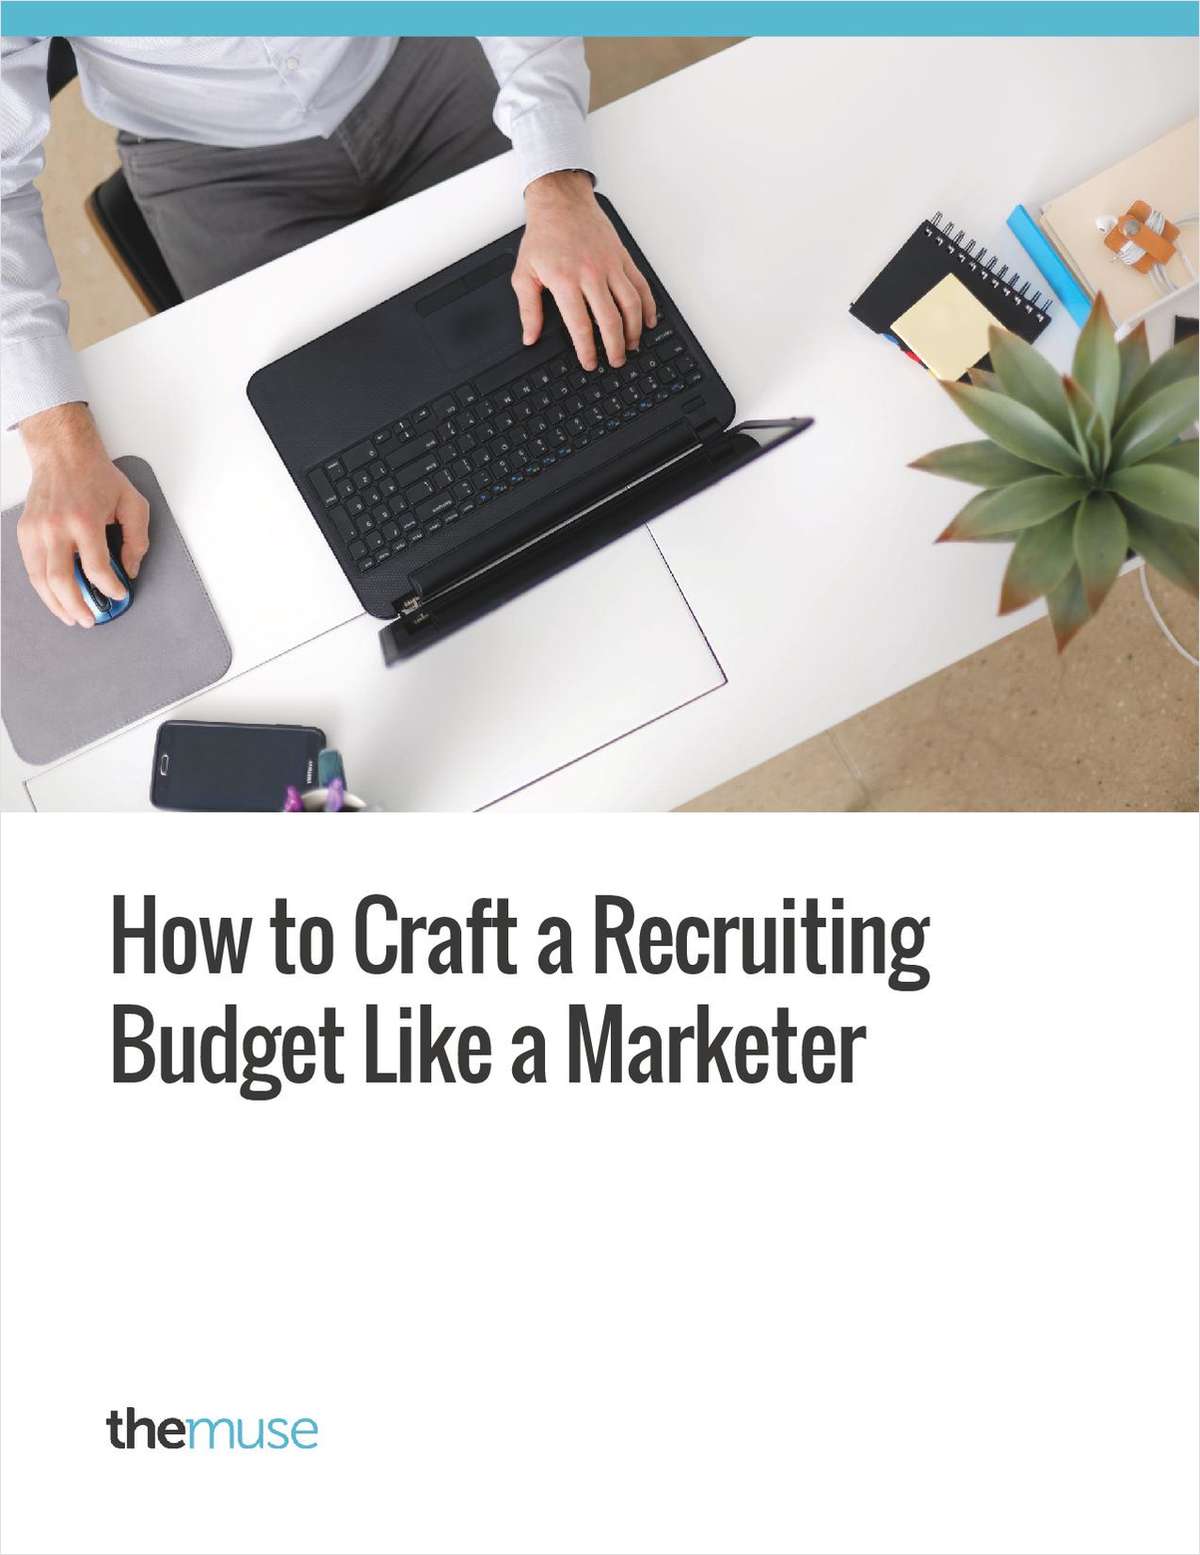 How to Craft a Recruiting Budget Like a Marketer